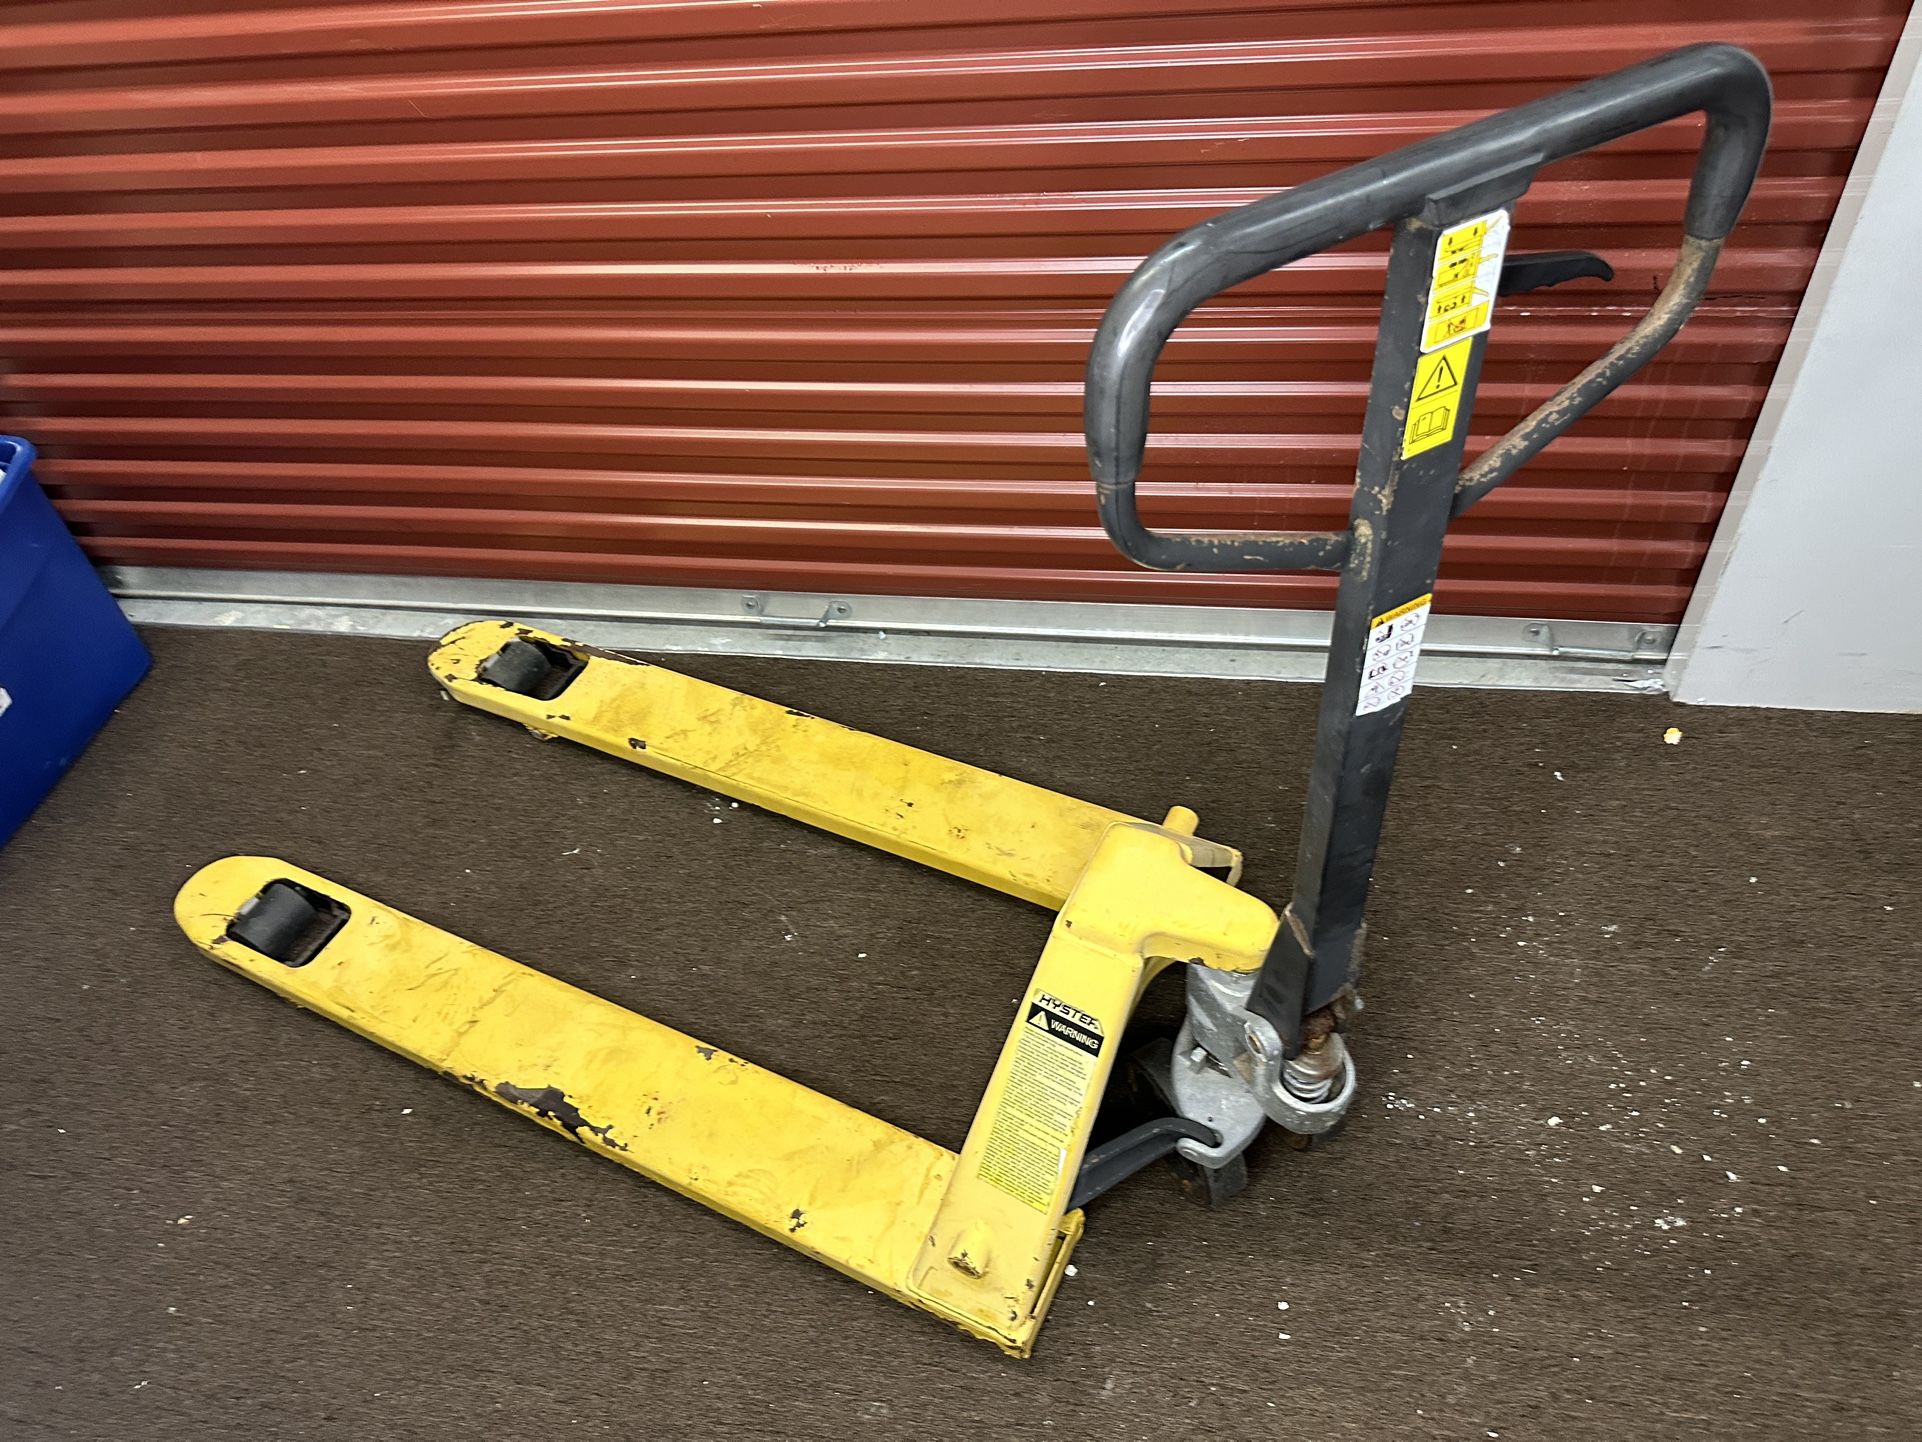 2015 HYSTER YELLOW PALLET JACK HEAVY COMMERCIAL EQUIPMENT LIFTING 